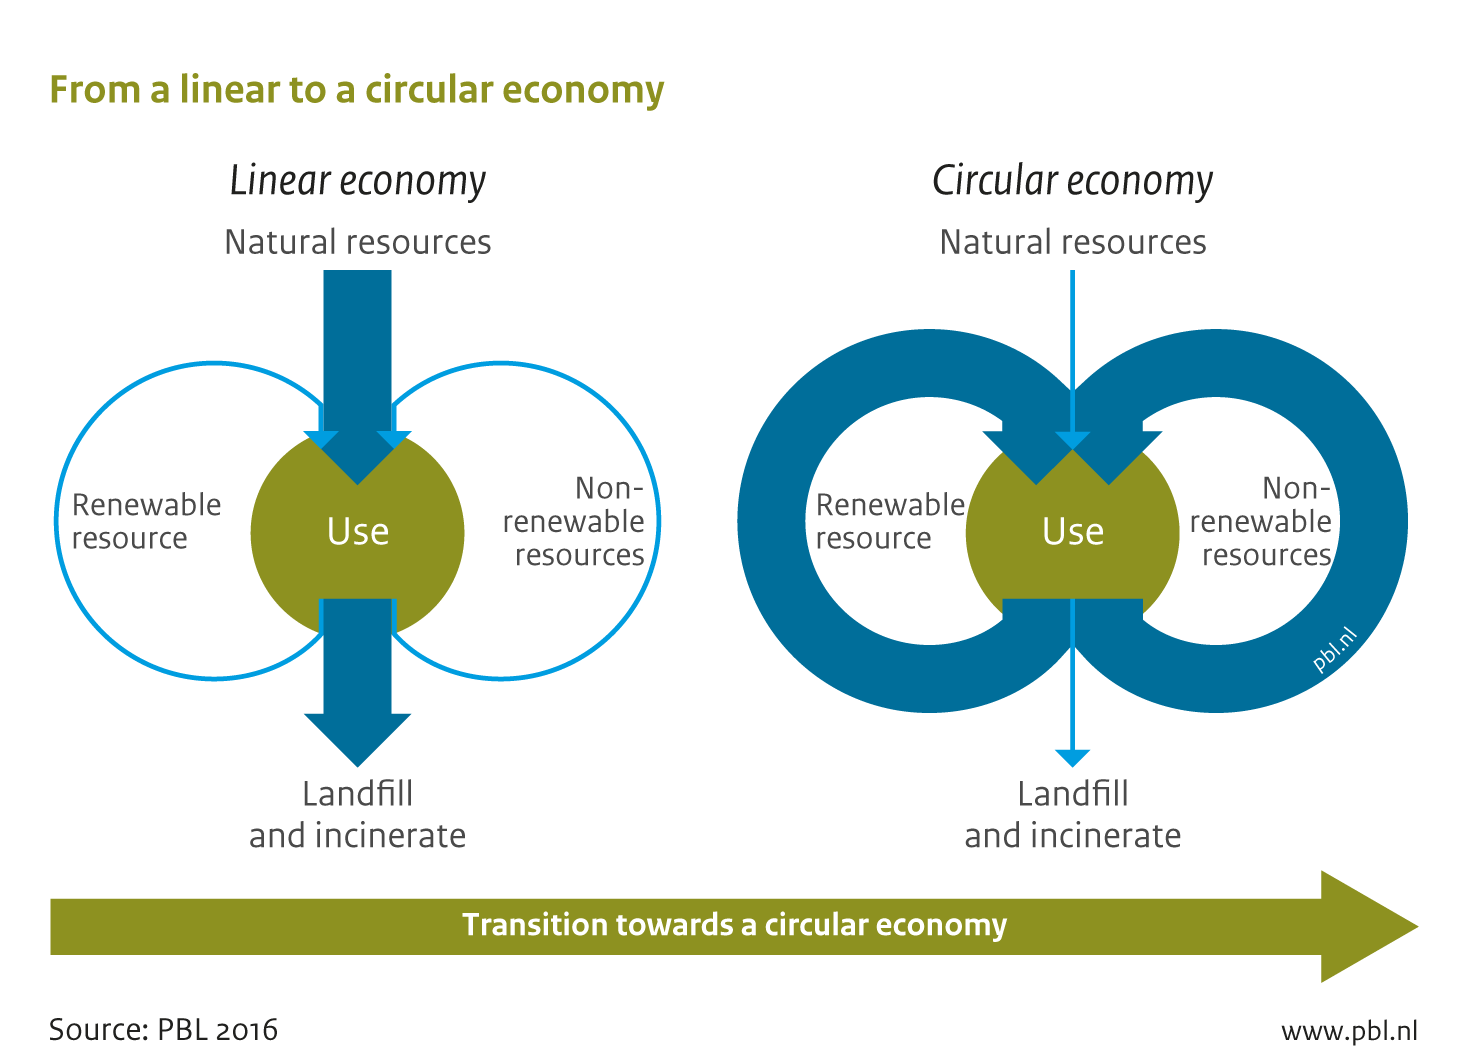 The circular economy is seen as a logical alternative to a linear economy. In a linear economy, natural resources are extracted for producing materials that are manufactured in products to be incinerated or landfilled after use. The essence of a circular economy is to preserve natural resources by retaining the quality and value of products and their parts, and the materials.